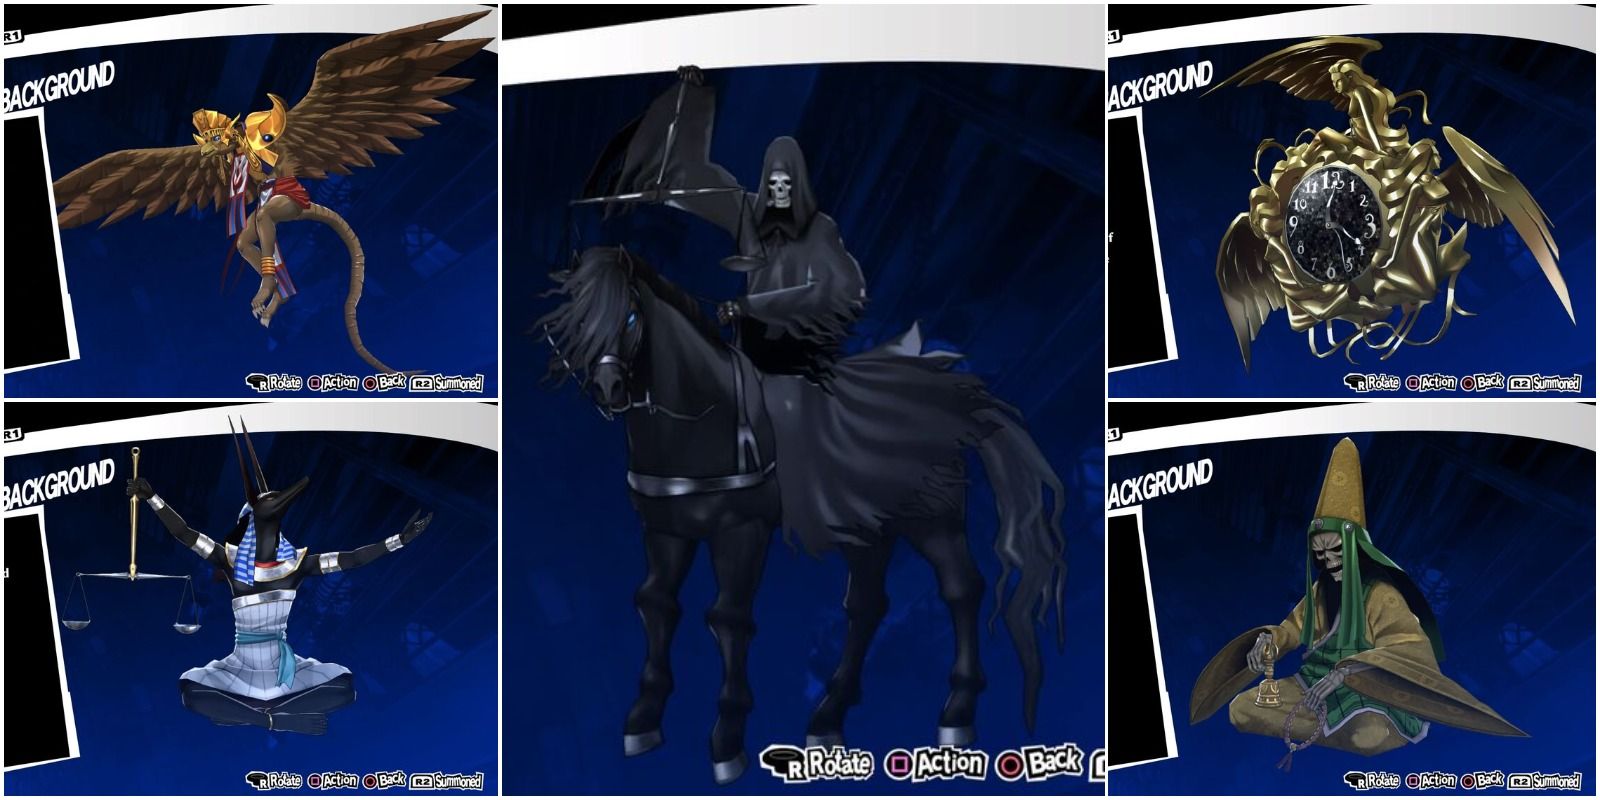 regn vedtage spisekammer Persona 5 Royal: 13 Recipes You Can Use To Fuse Black Rider